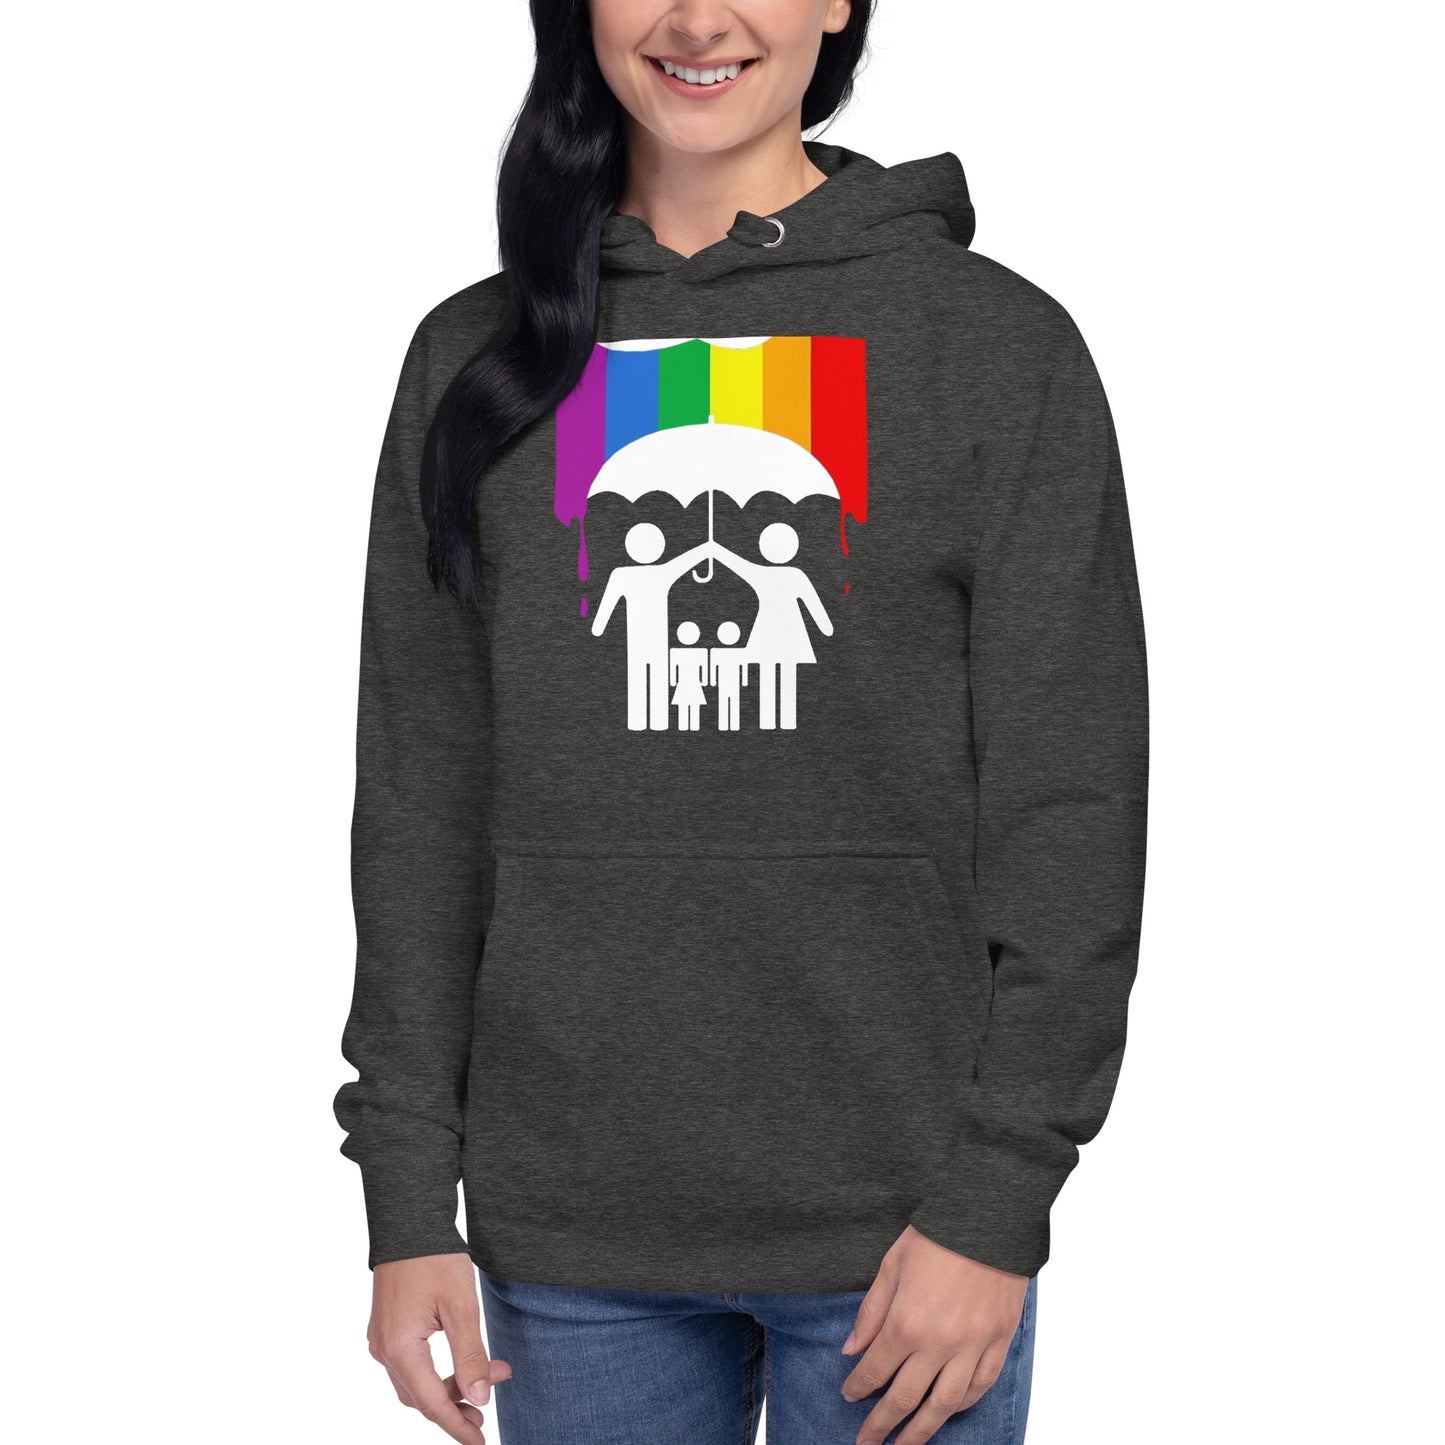 6 - Family Pride Sweater - Black, Navy Blue + More